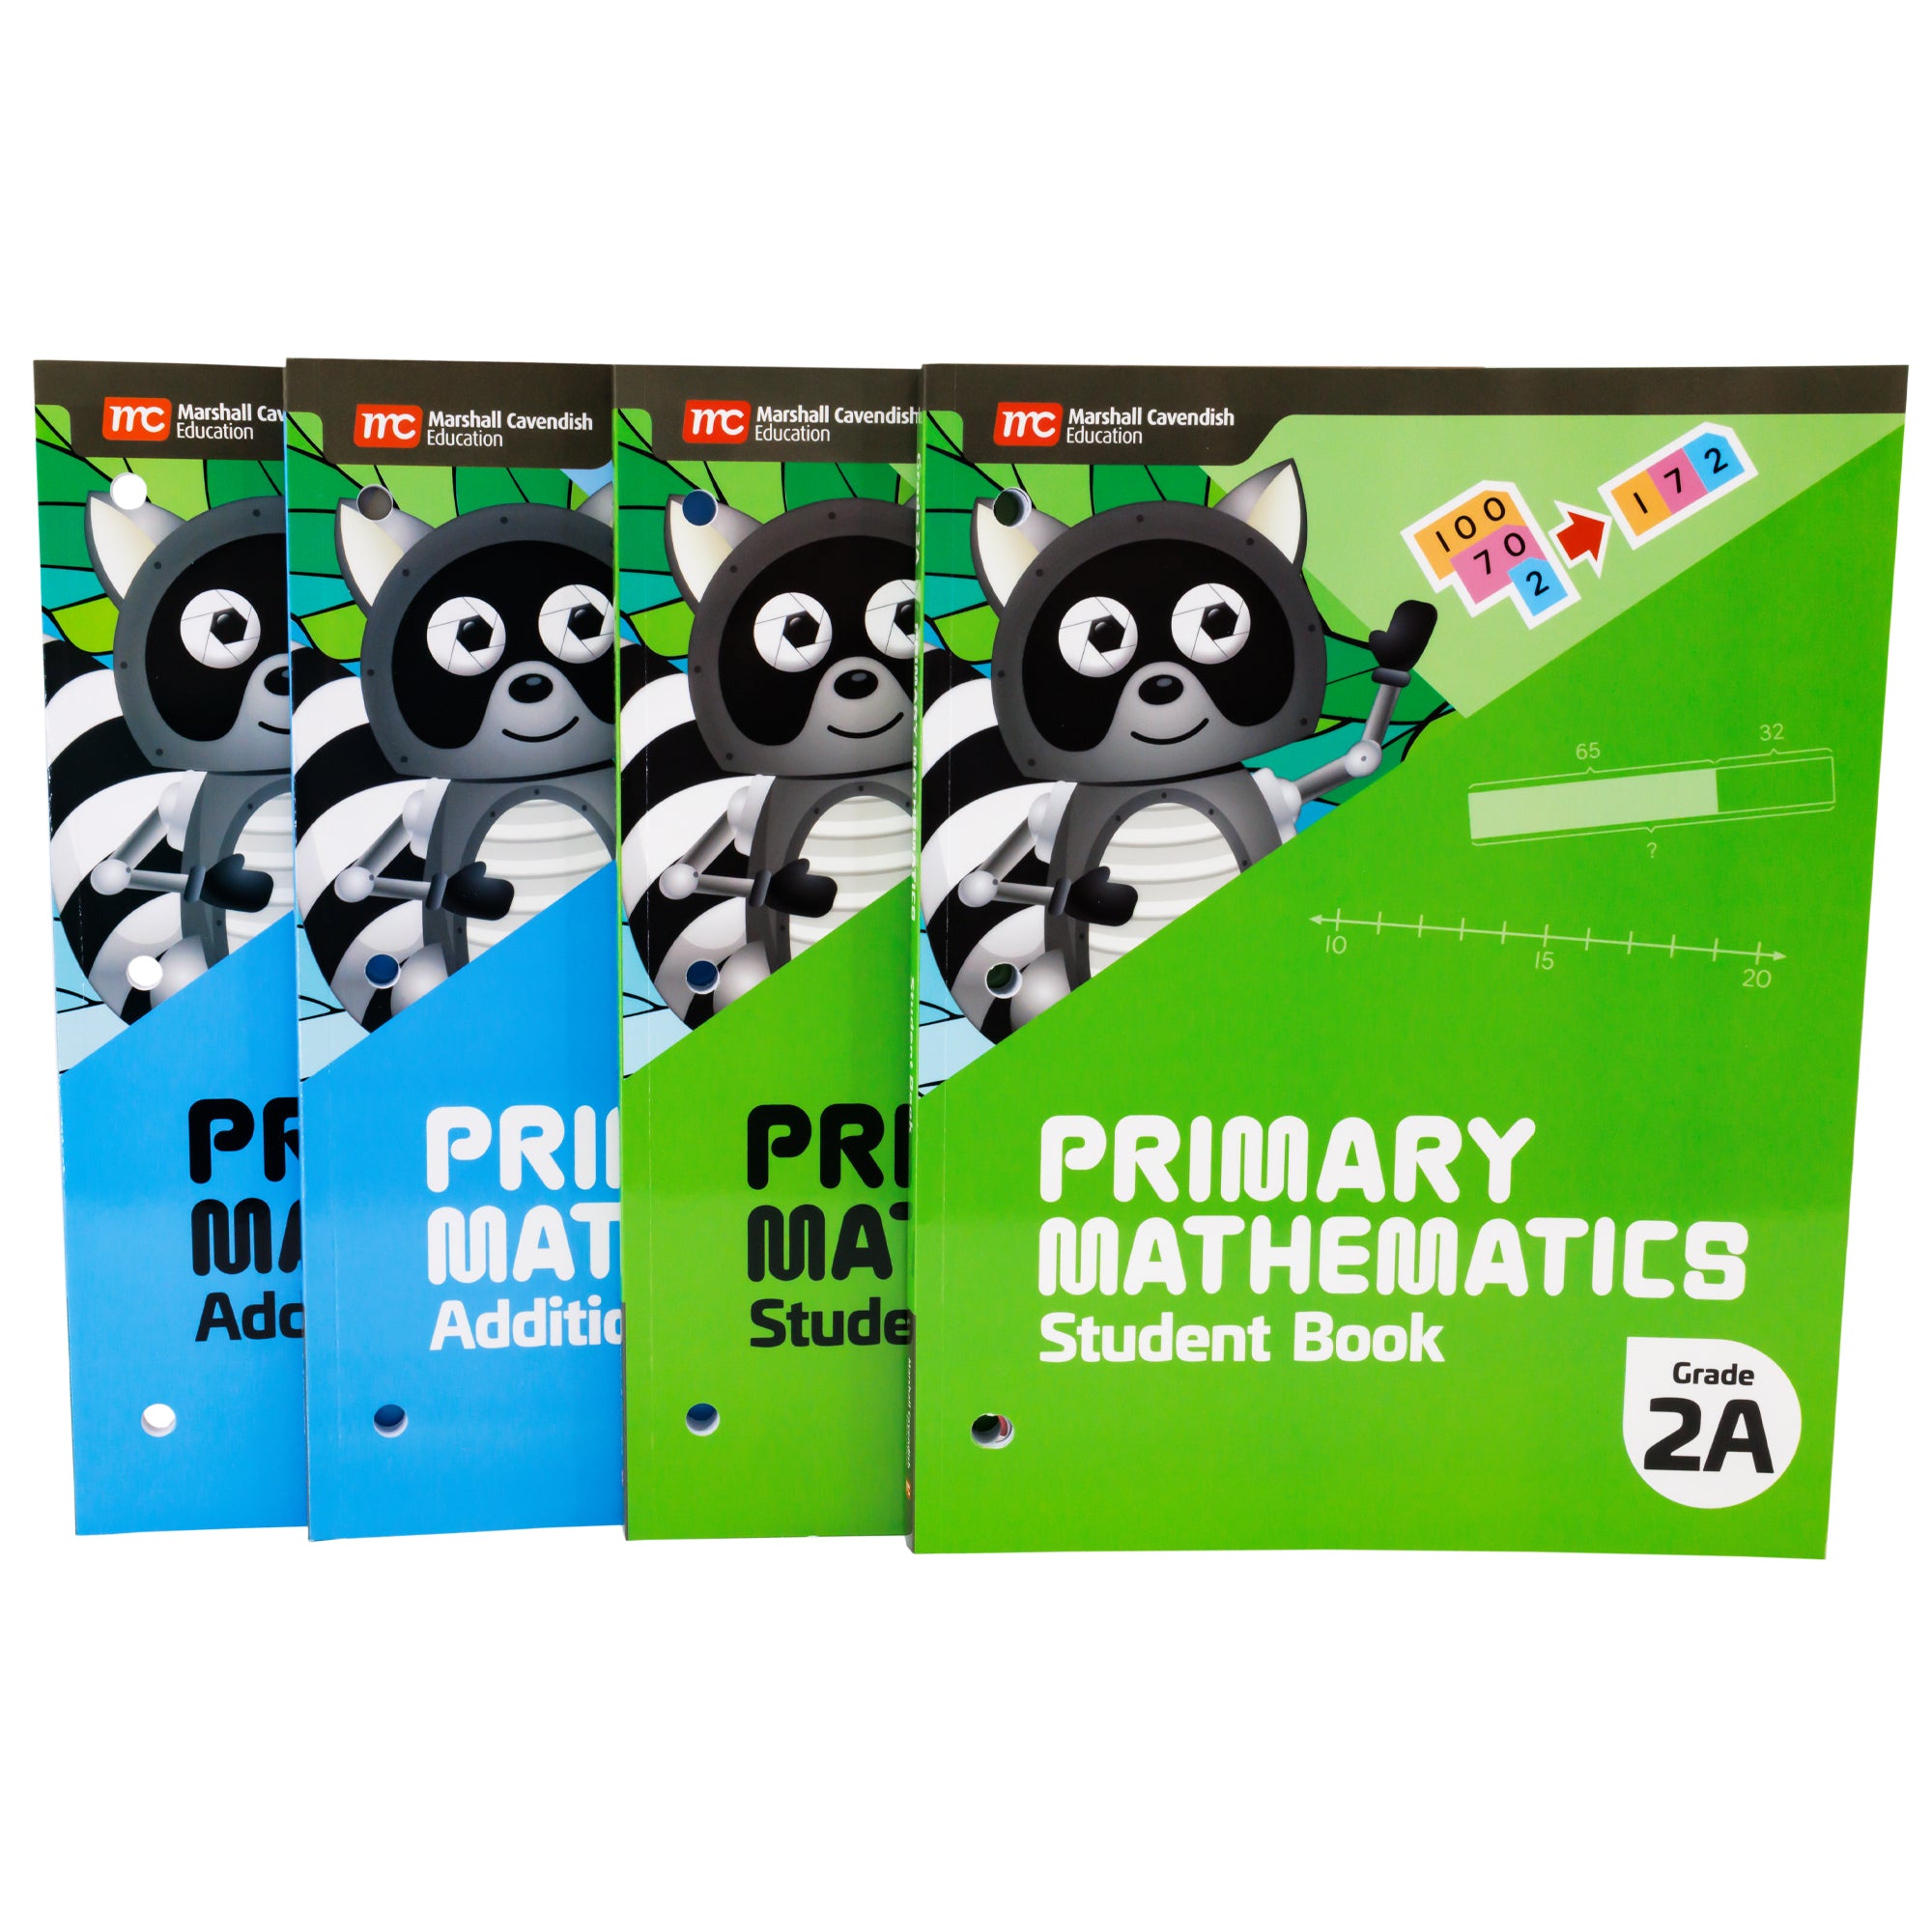 A row of 4 Singapore Primary Math second grade books. All books show a racoon on the cover with a blue background on the 2 left books and a green background on the 2 right books.